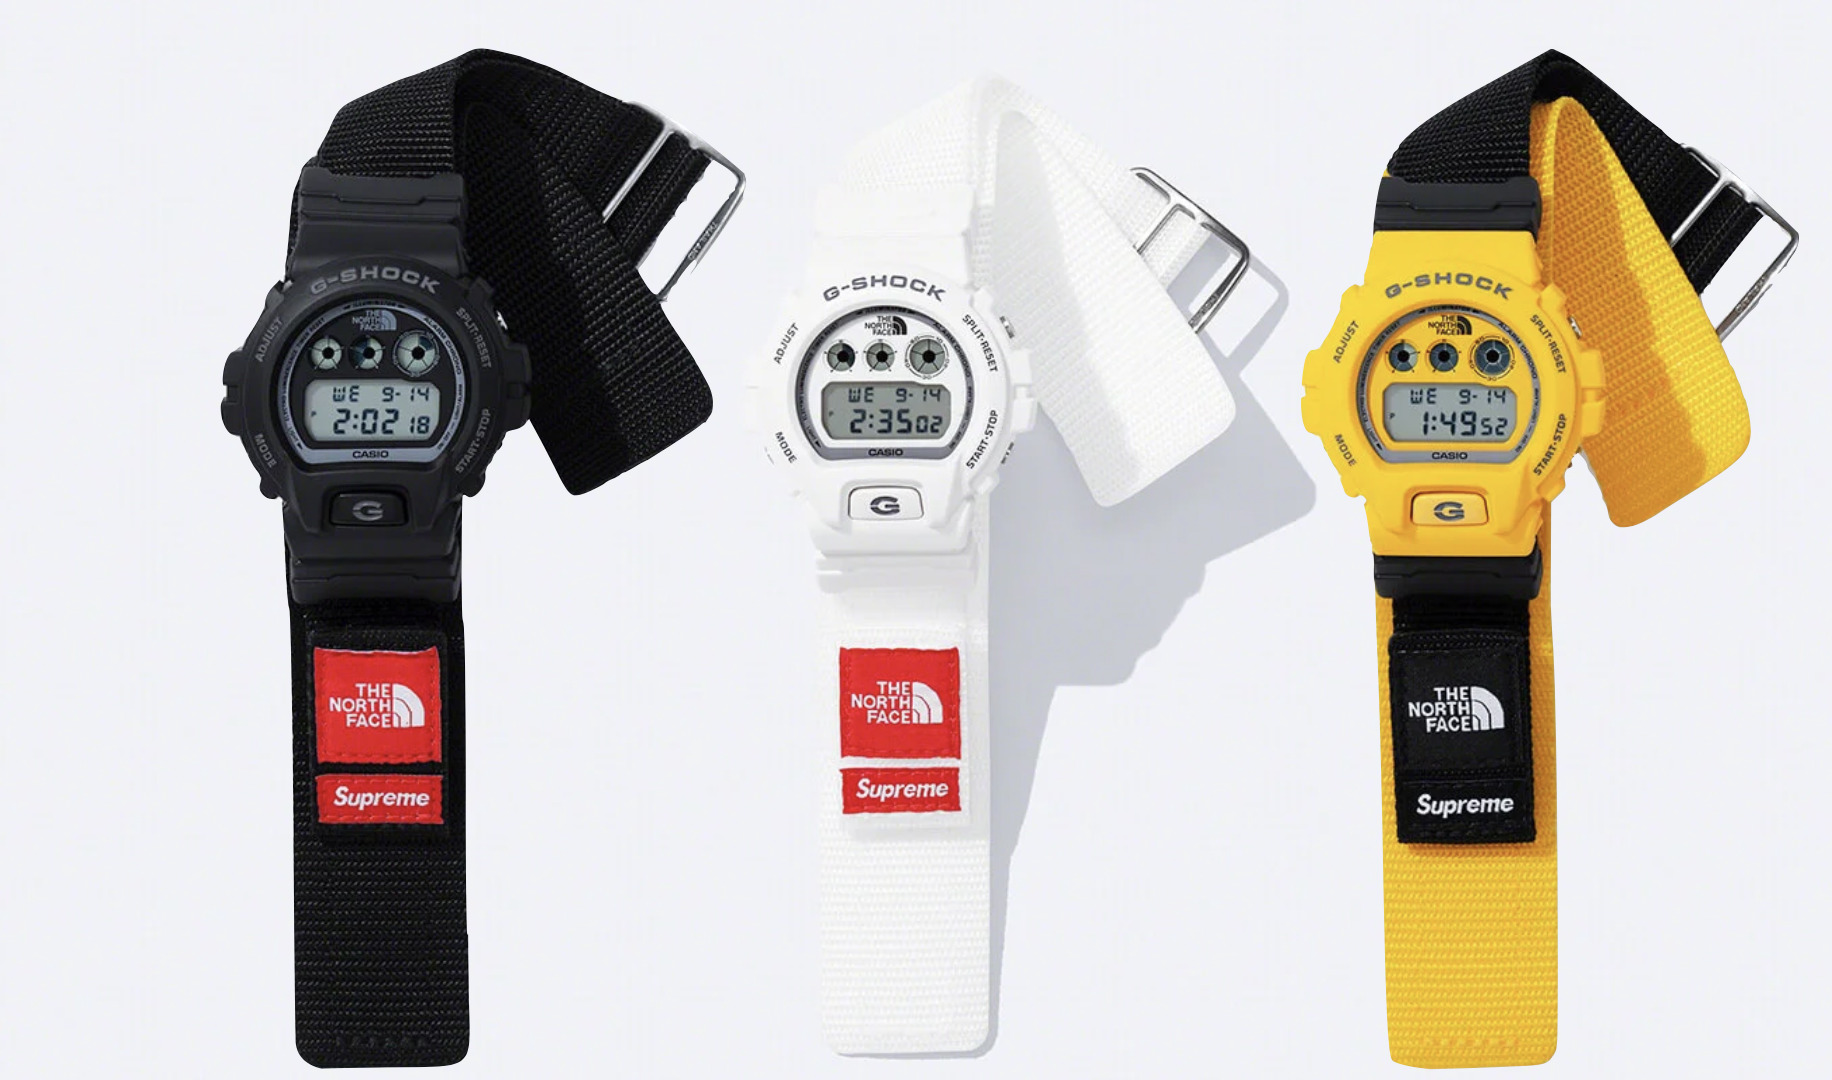 The North Face & Supreme Casio G Shock Is A Bulletproof Collaboration